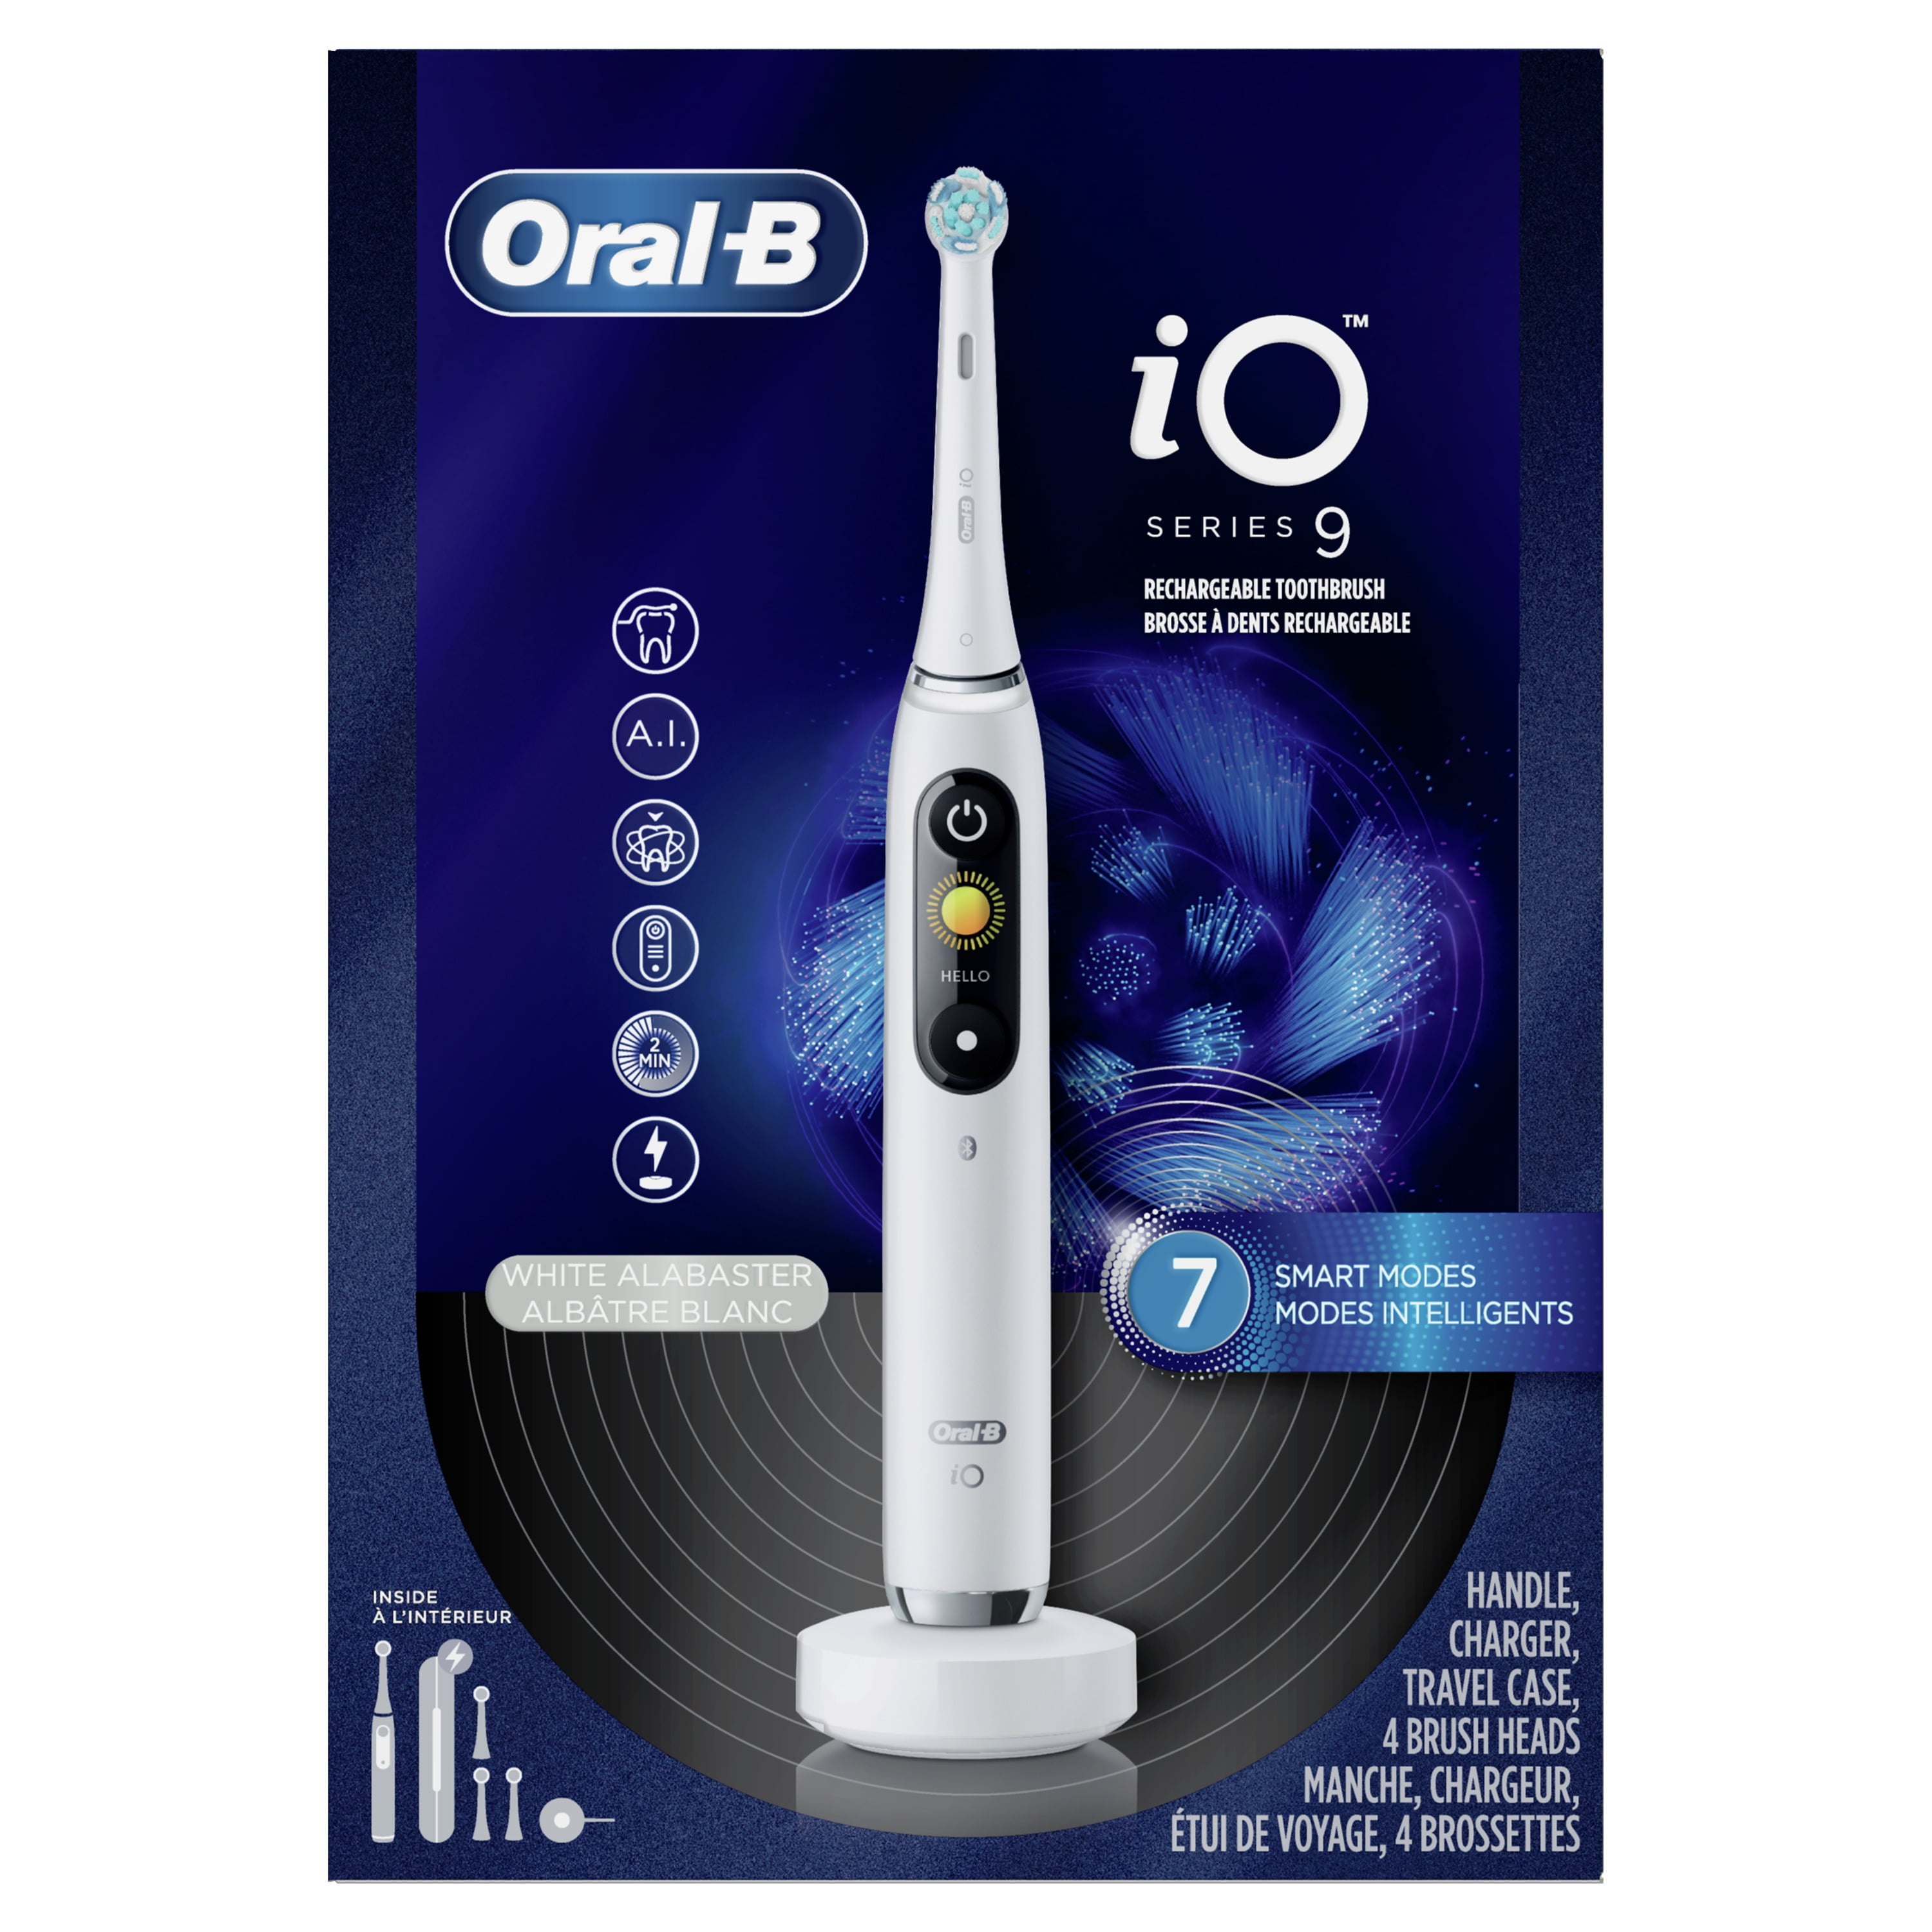 Oral-B iO Series 9 Electric Toothbrush with 4 Brush Heads, Black Onyx - africanbarn.com